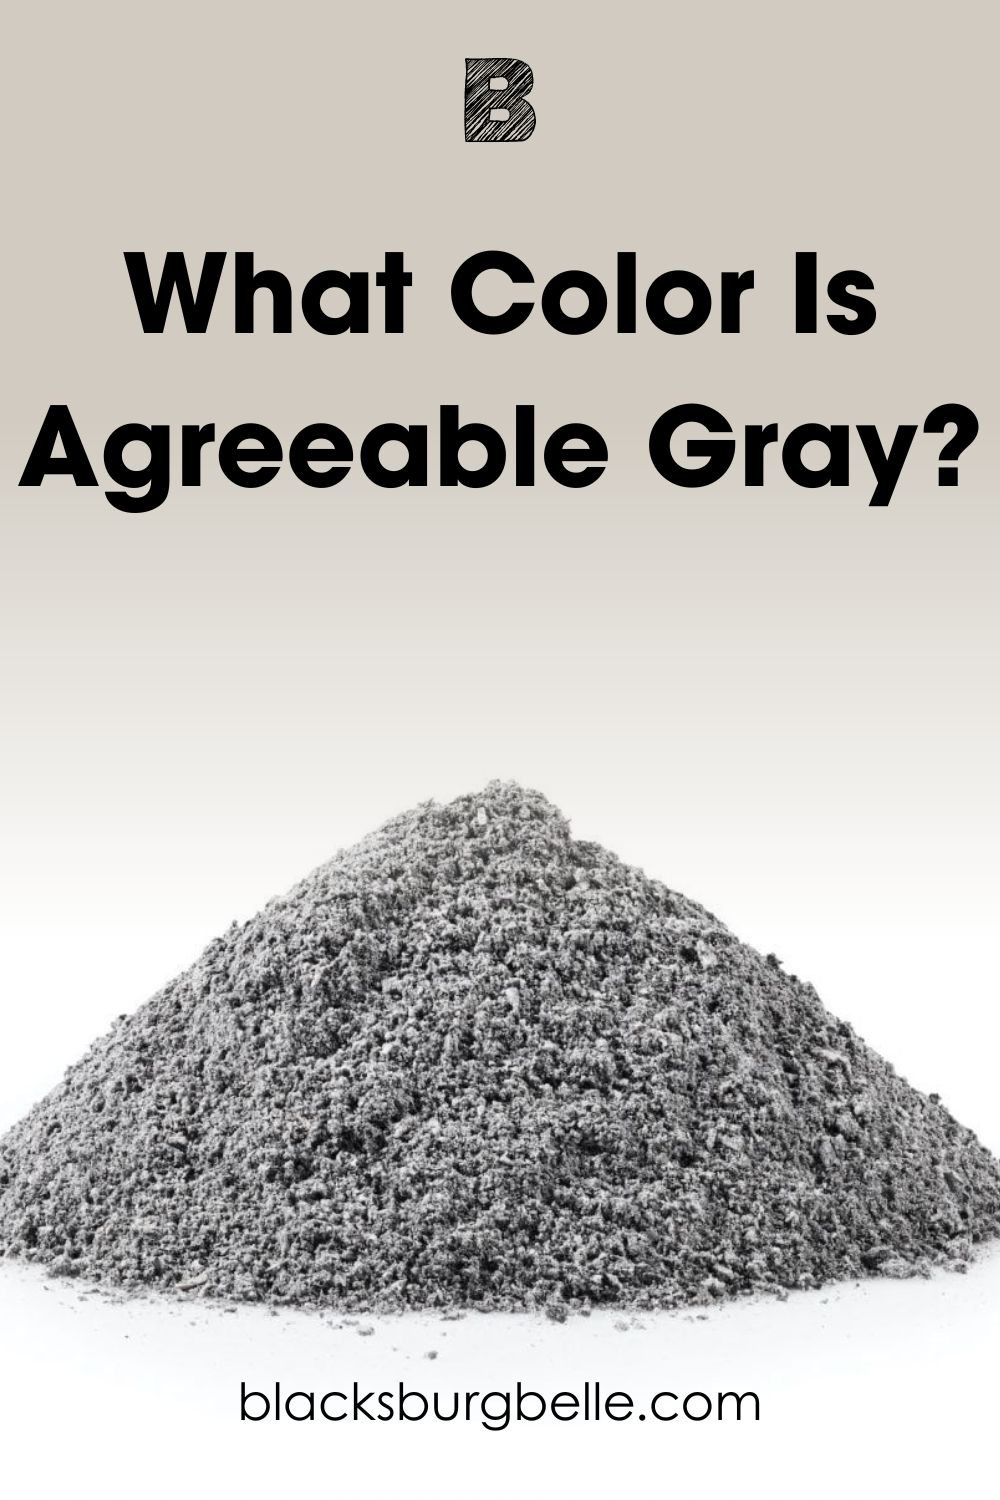 What Color Is Agreeable Gray